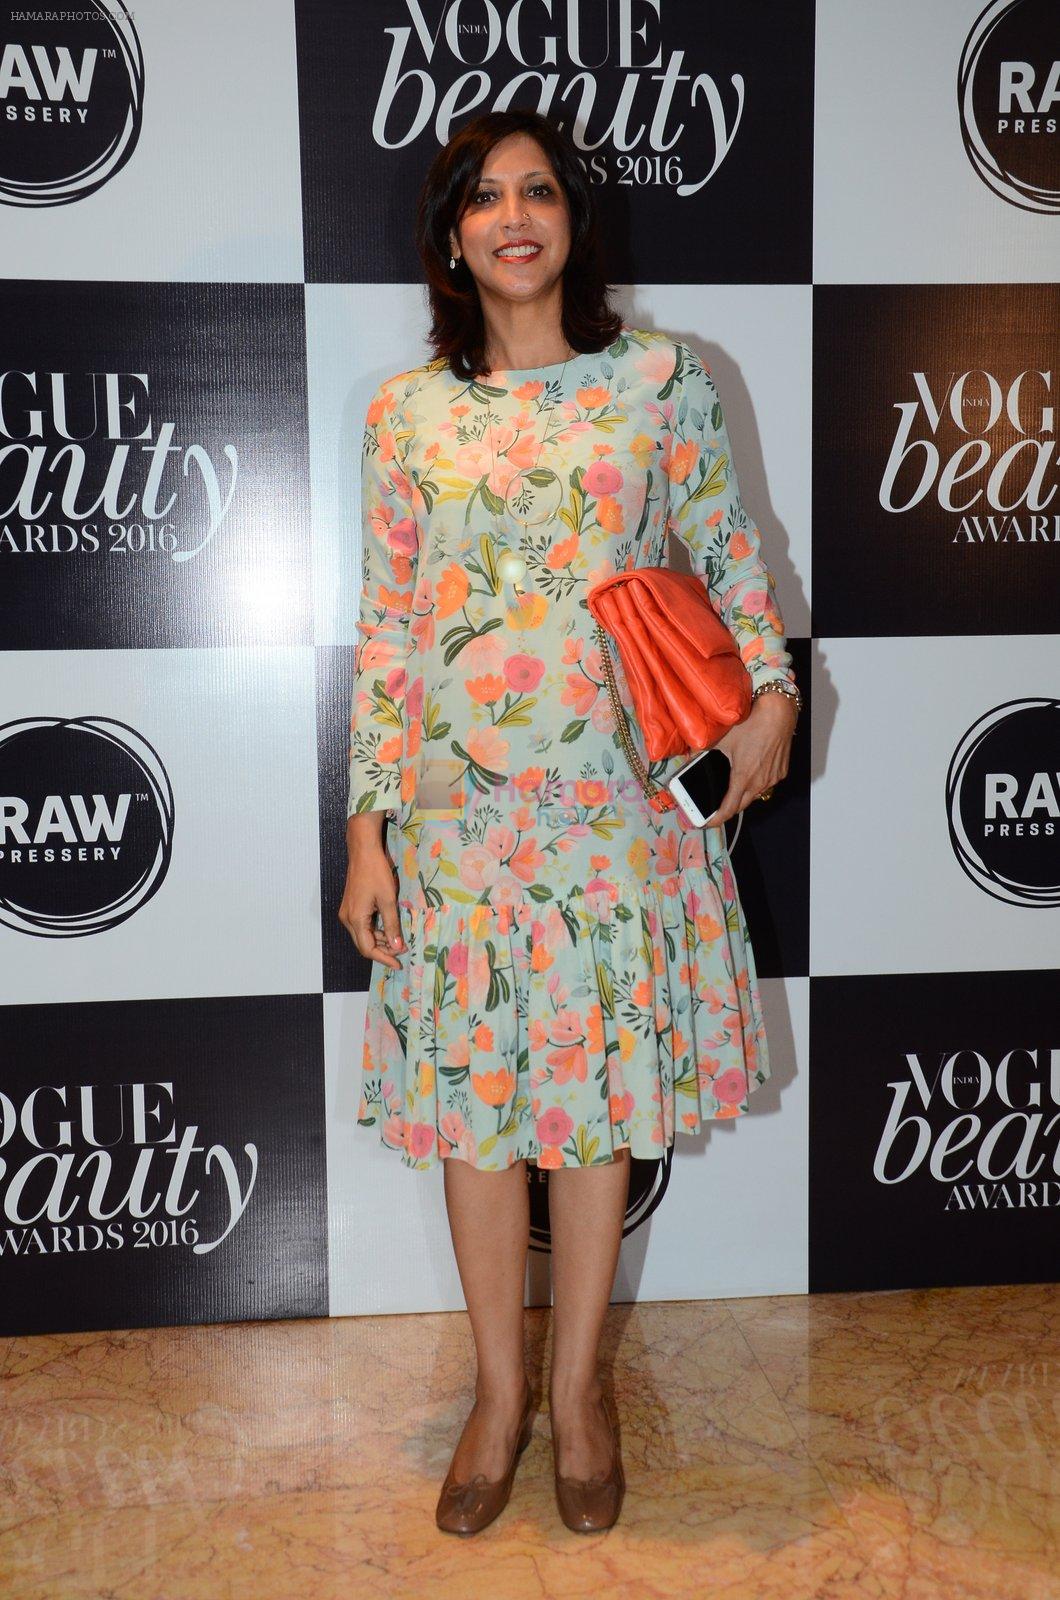 at Vogue Beauty Awards 2016 on 27th July 2016